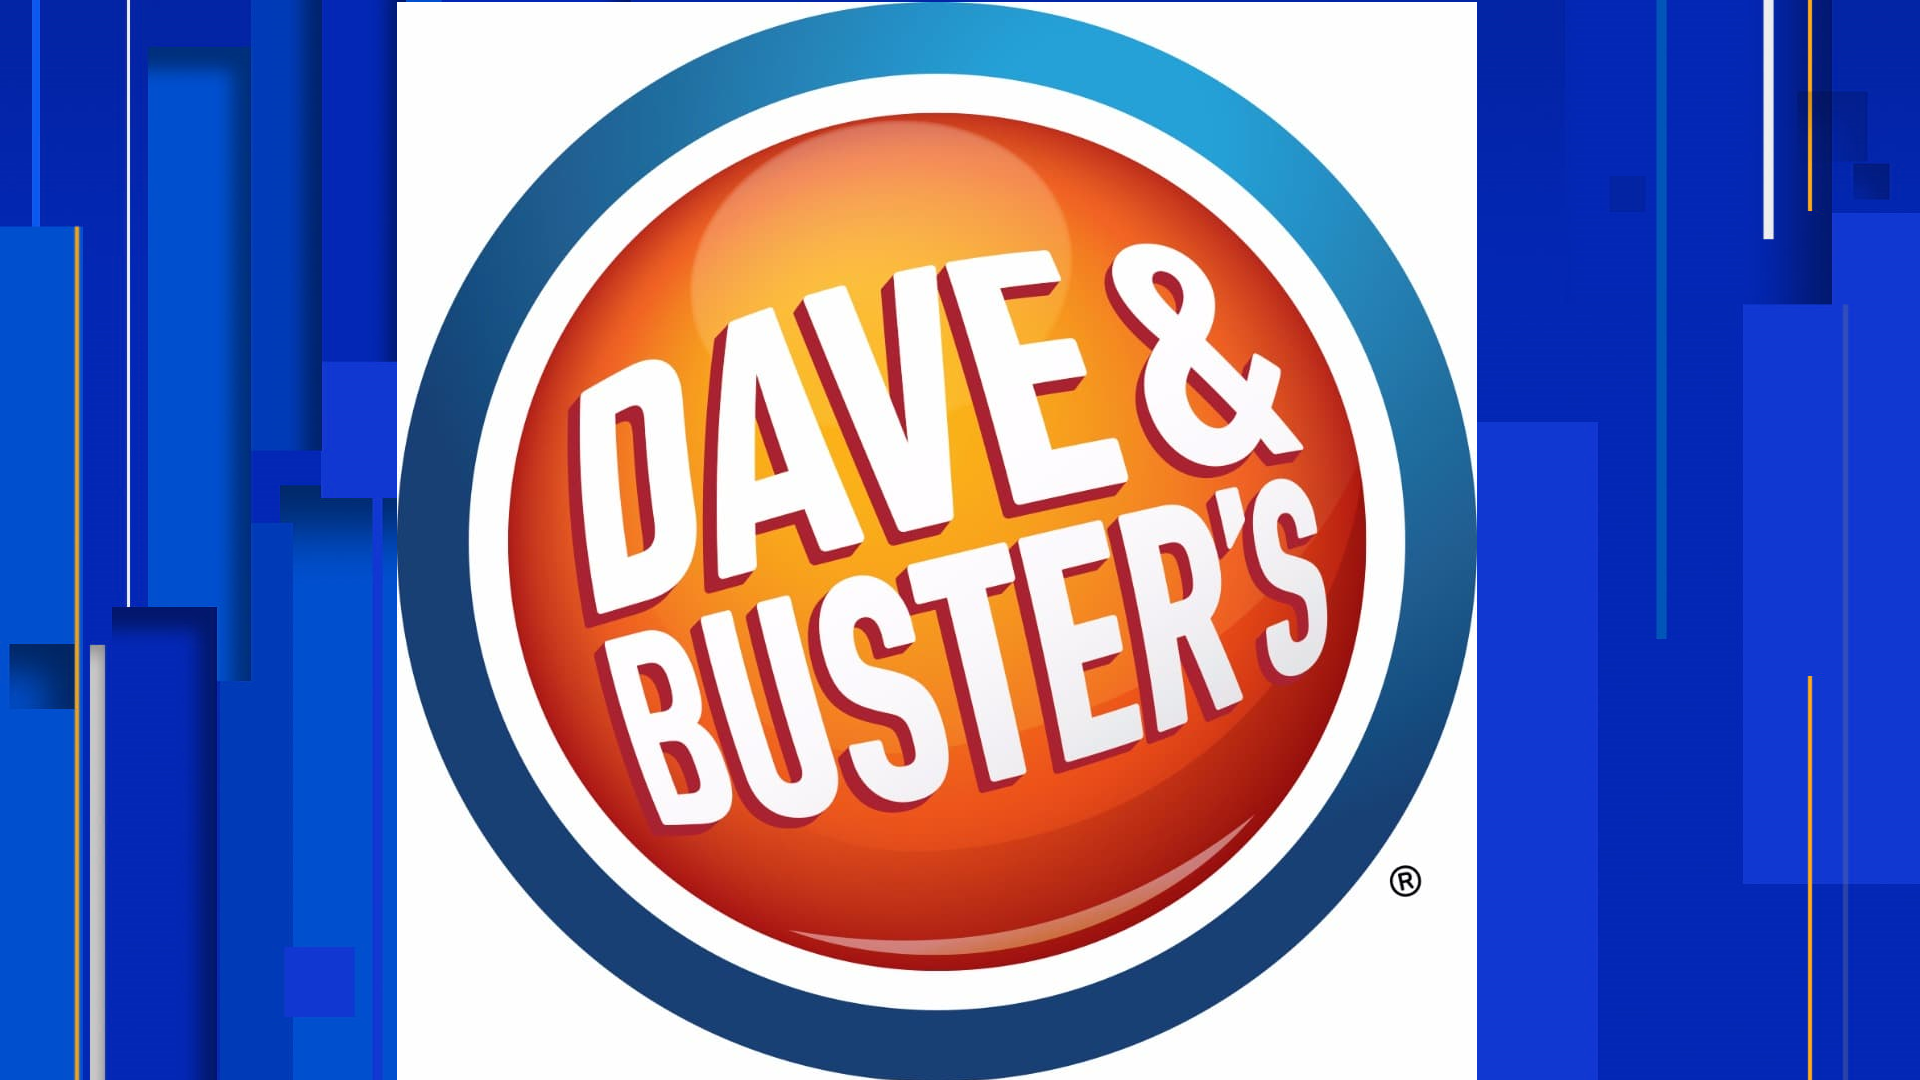 James 'Buster' Corley, Co-Founder of Dave & Buster's, Dies at 72